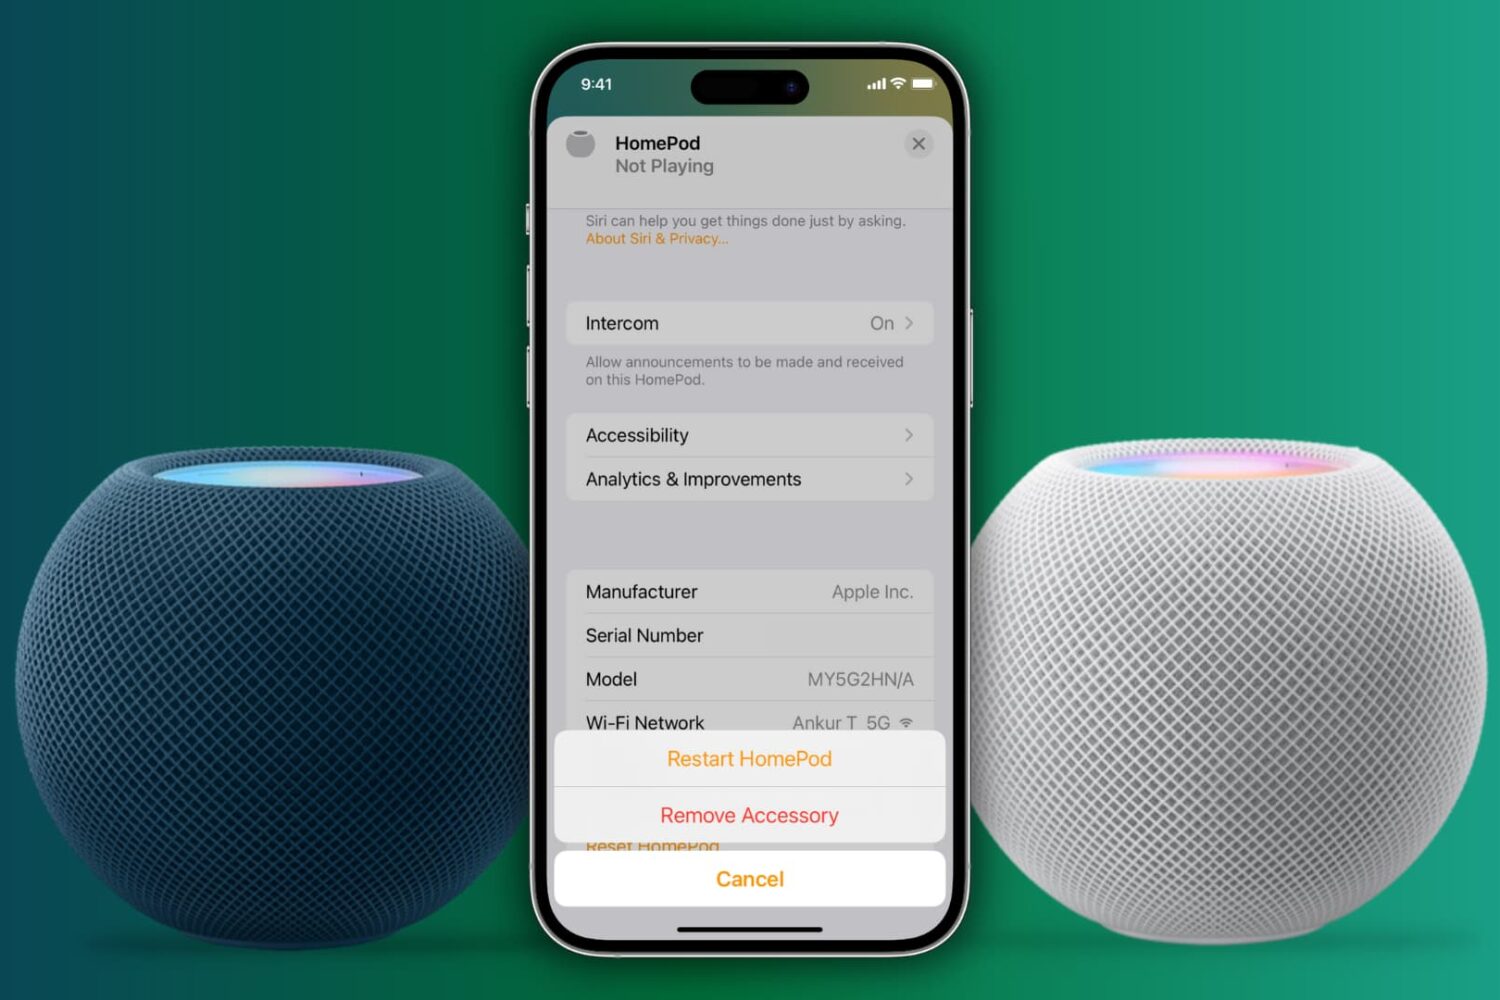 A white and blue HomePod mini kept near an iPhone with the Restart HomePod option on the screen